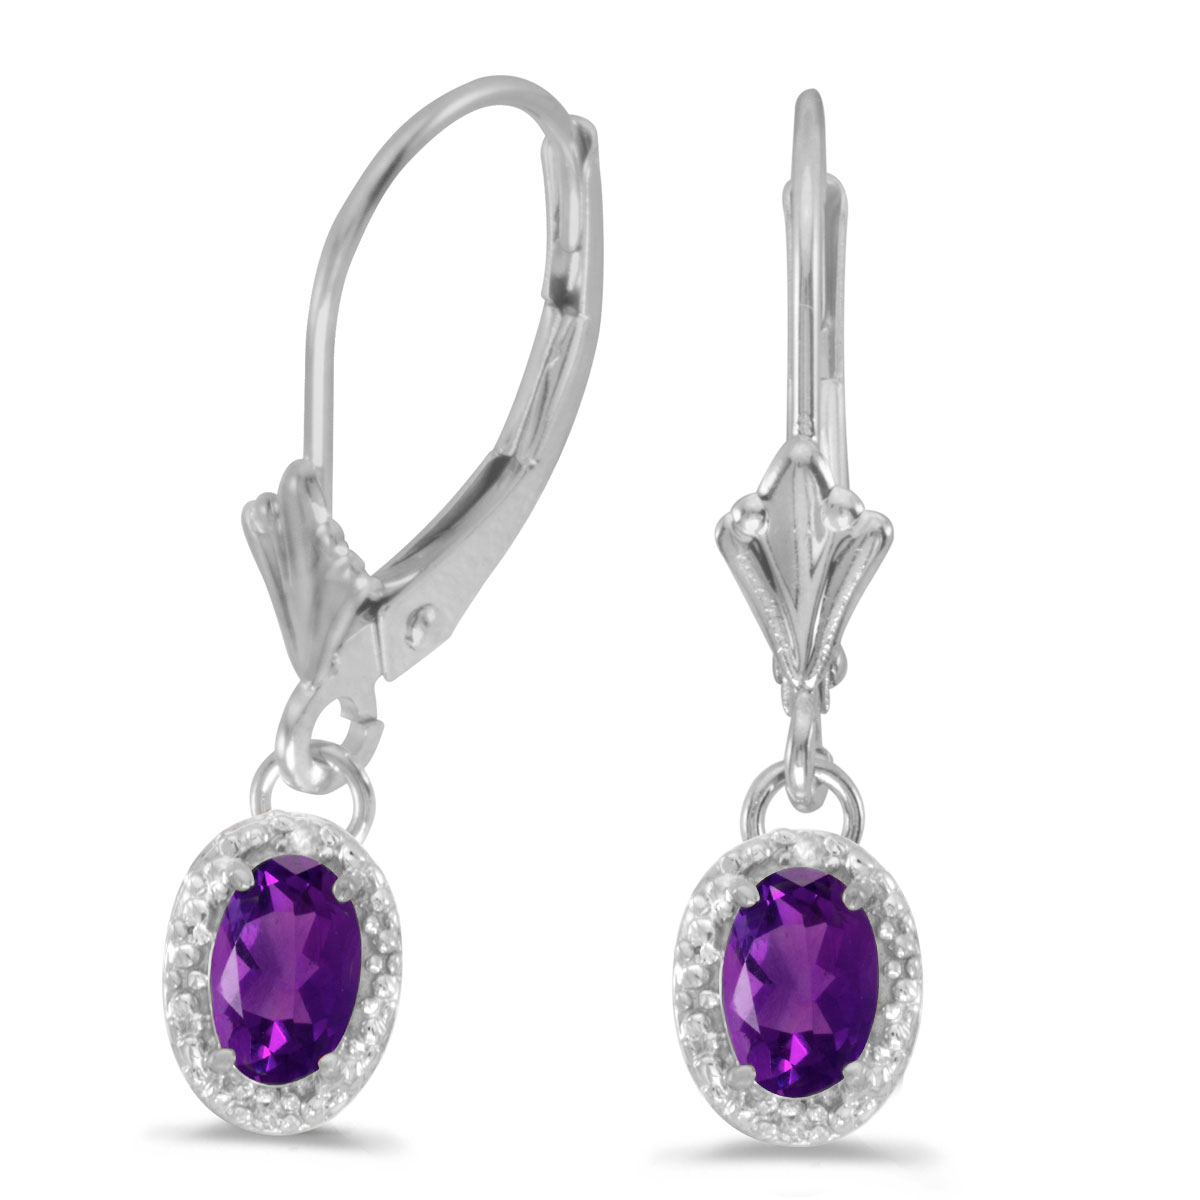 Beautiful 10k white gold leverback earrings with lovely 6x4 mm amethysts complemented with bright...